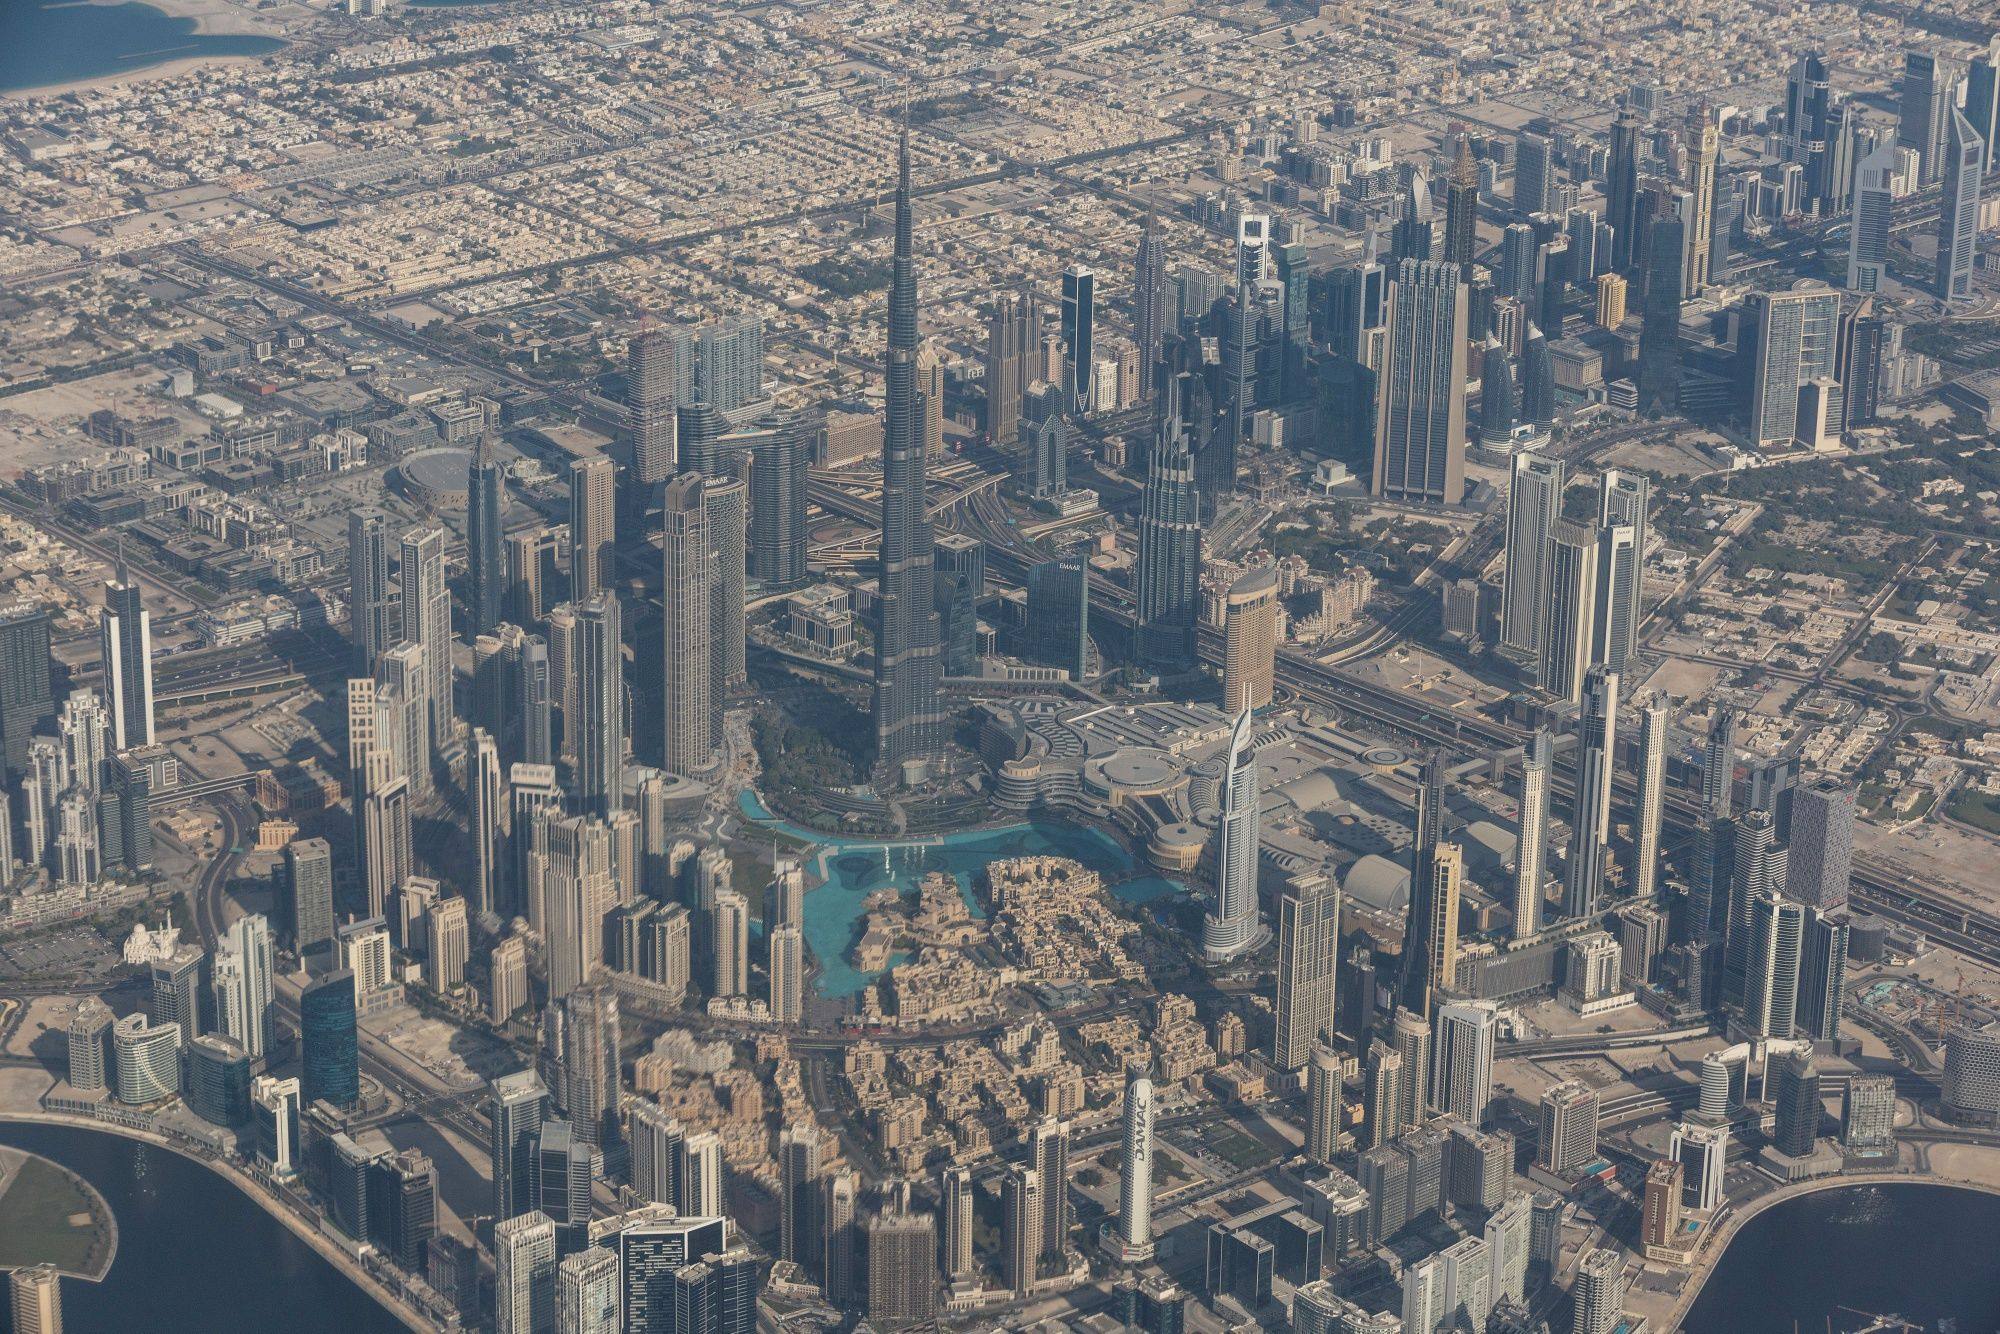 The strategy aims to attract foreign and local investors while solidifying Dubai’s position as a leading global financial centre. Photo: Bloomberg